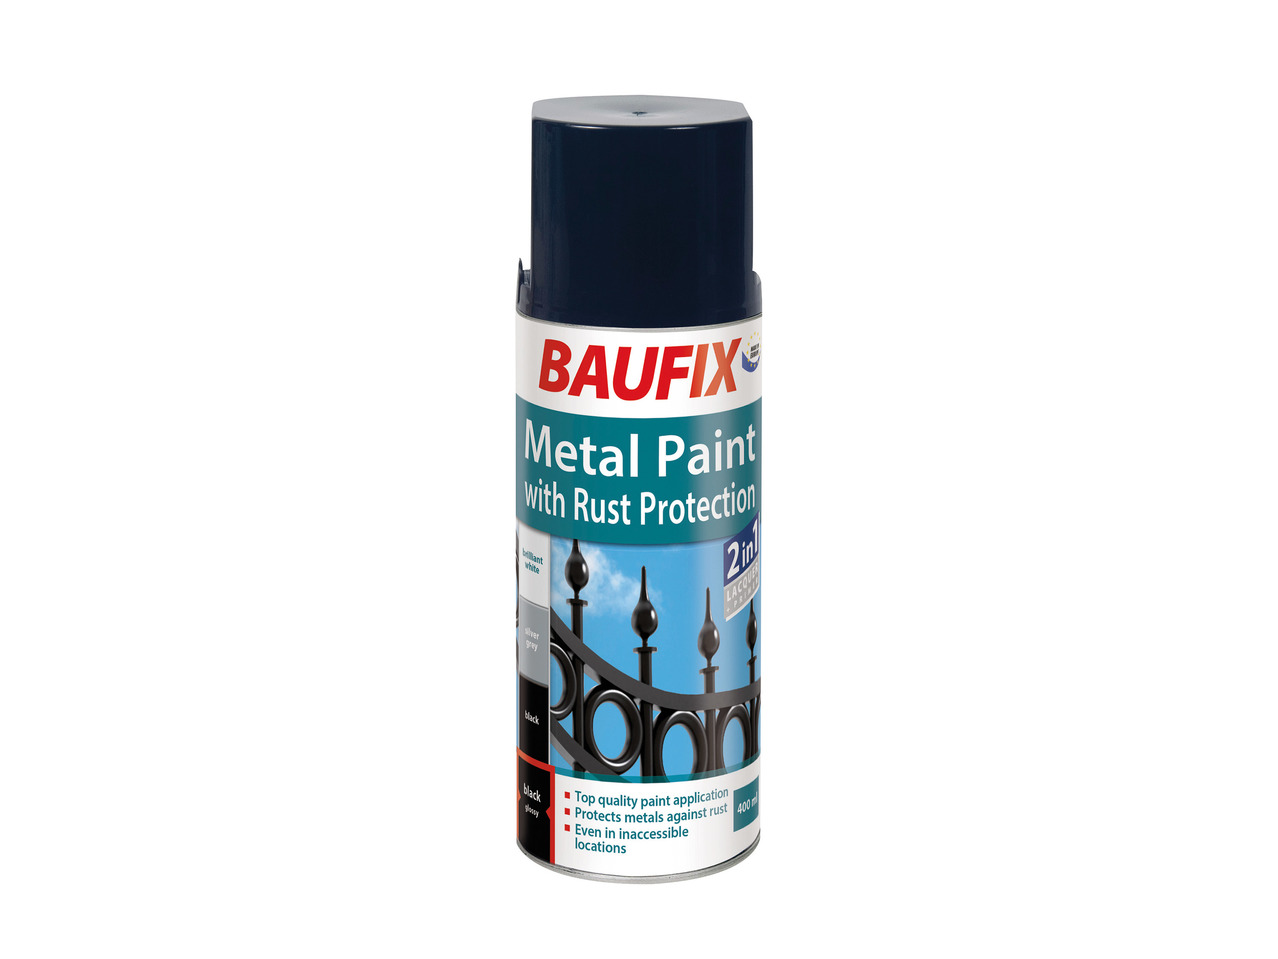 Baufix Metal Paint with Rust Protection1